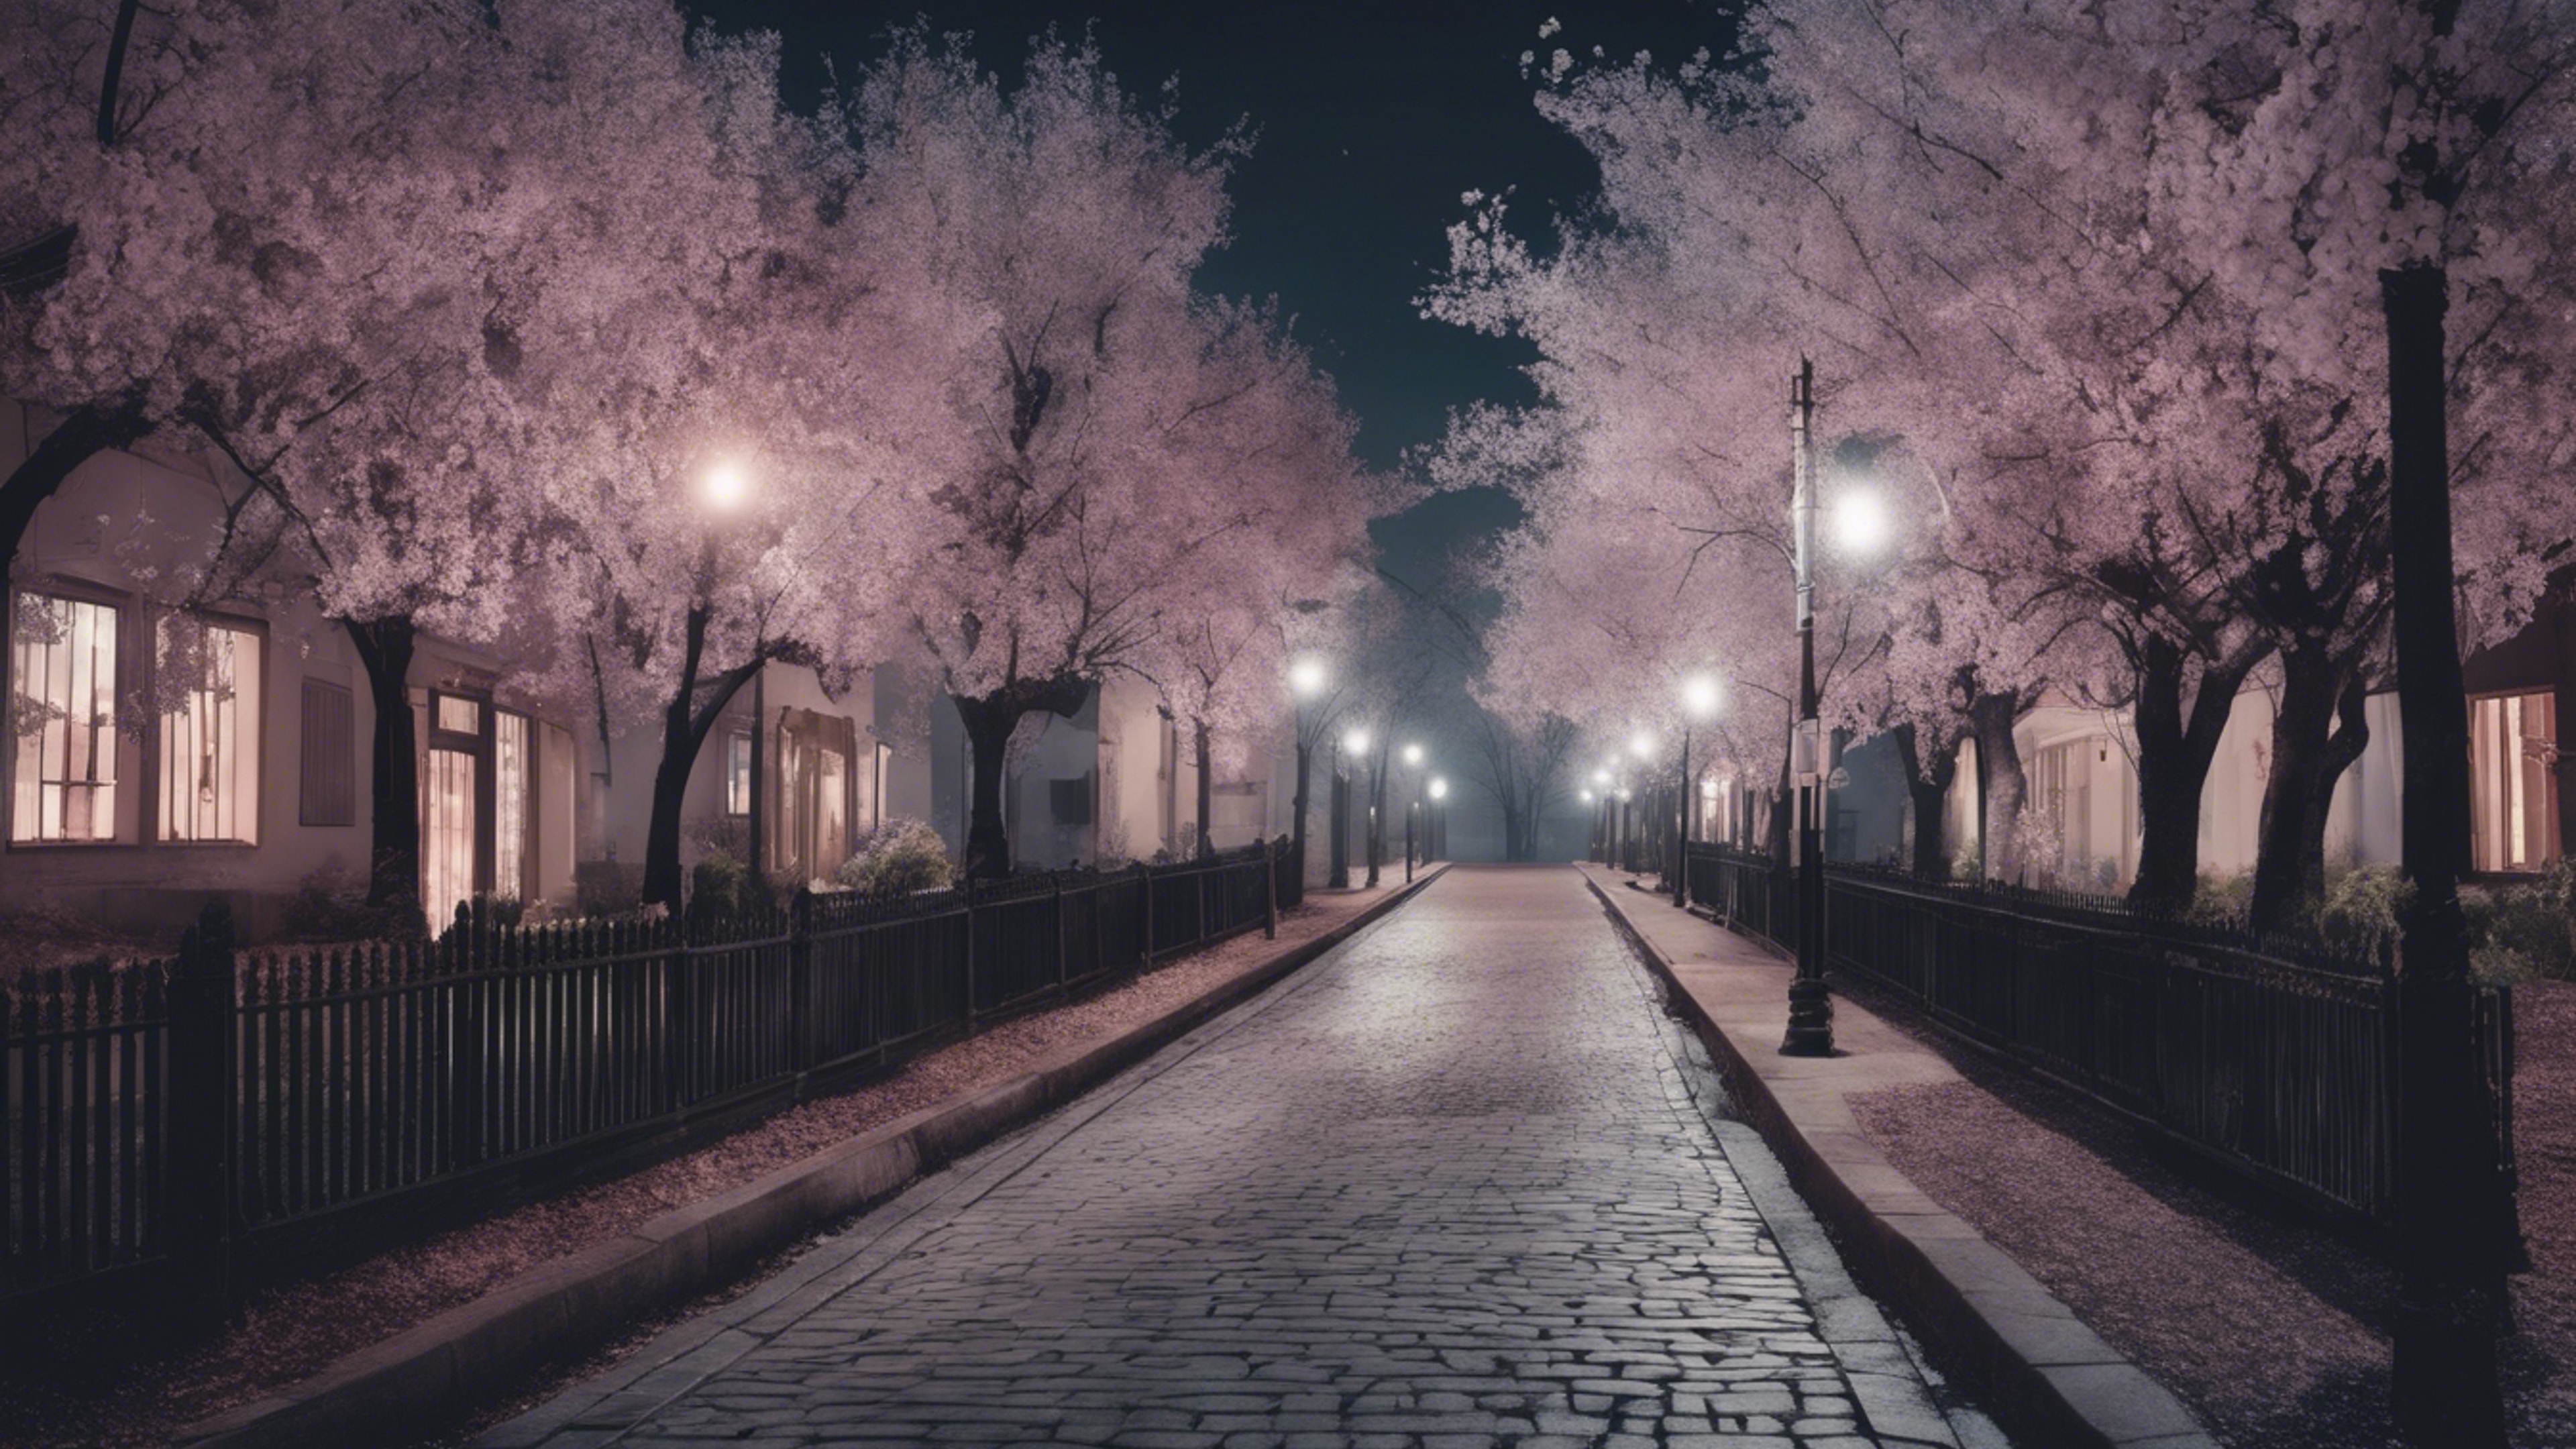 Pastel gothic street lined with black blossom trees under the ghostly night sky. Tapet[dc1e1b7f0a0c4838b6b6]